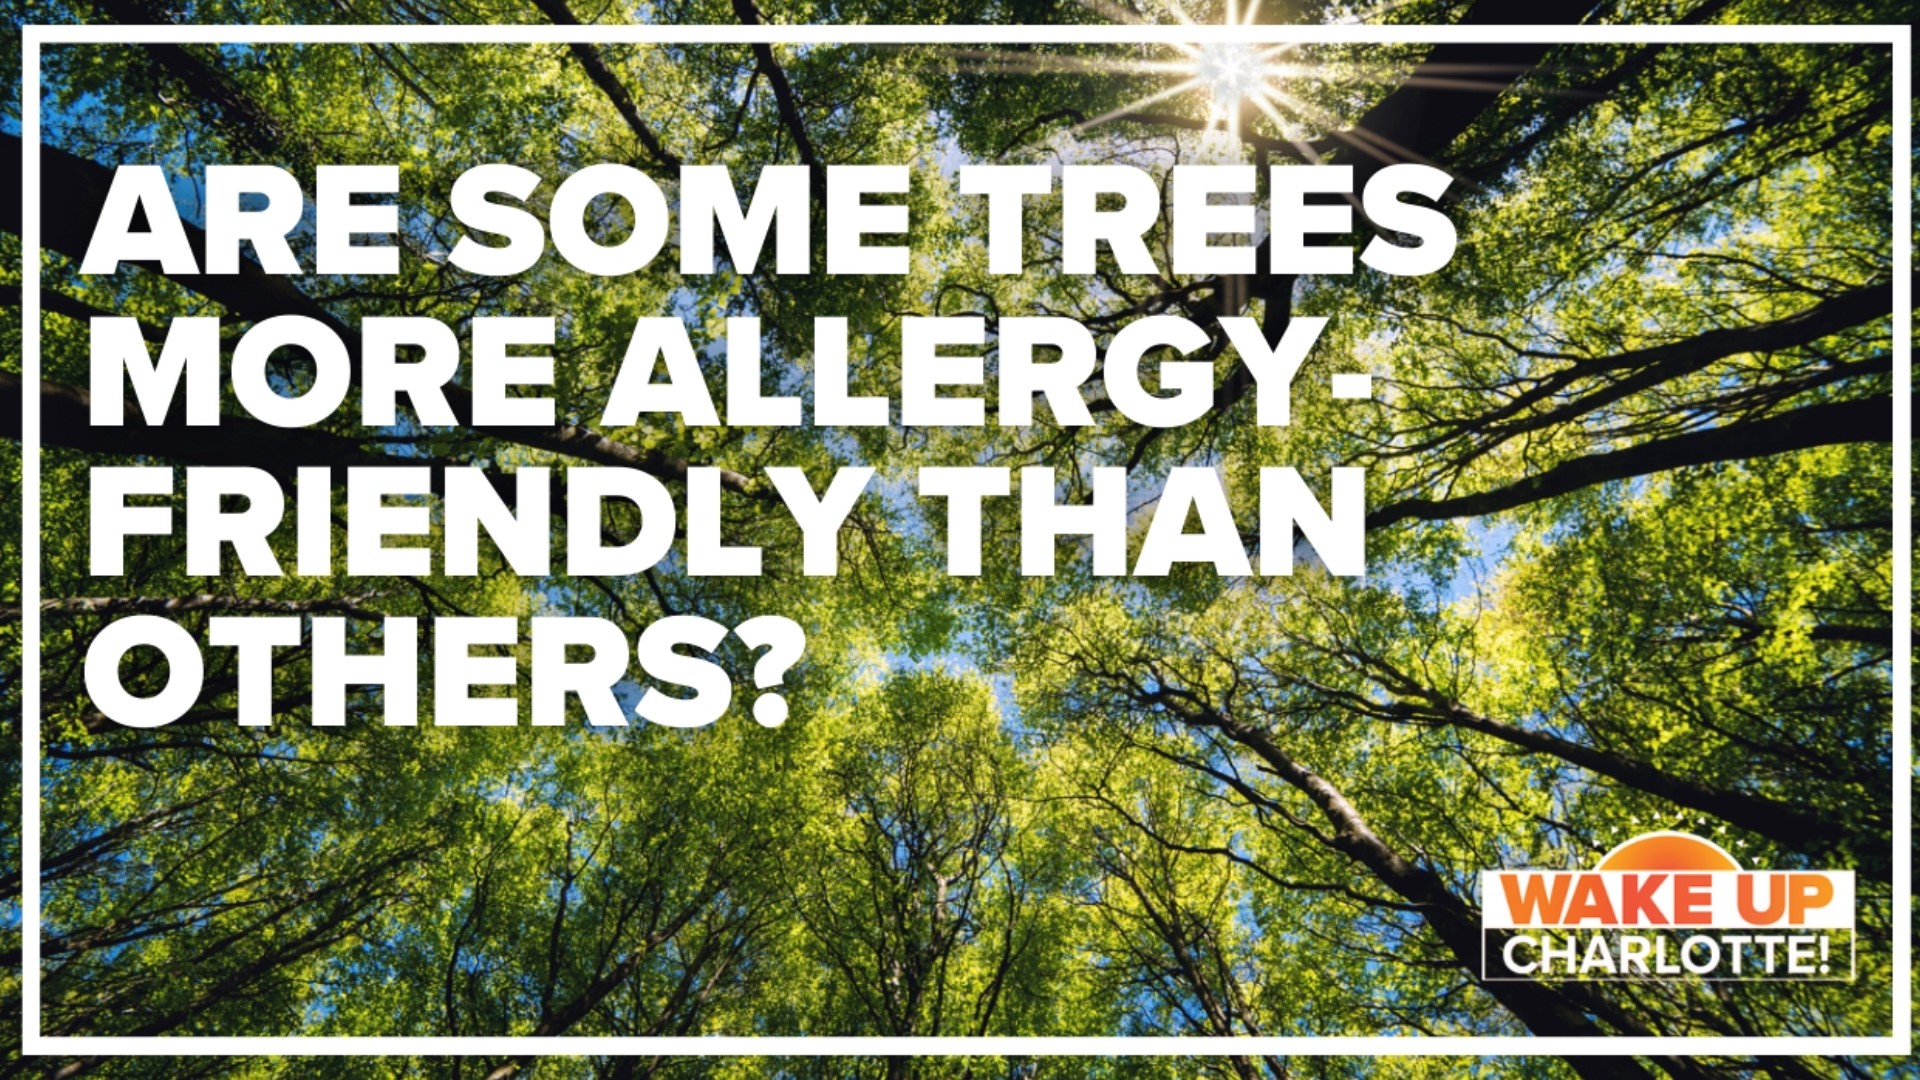 As many of us are fighting seasonal allergies, we're looking for any relief we can get.